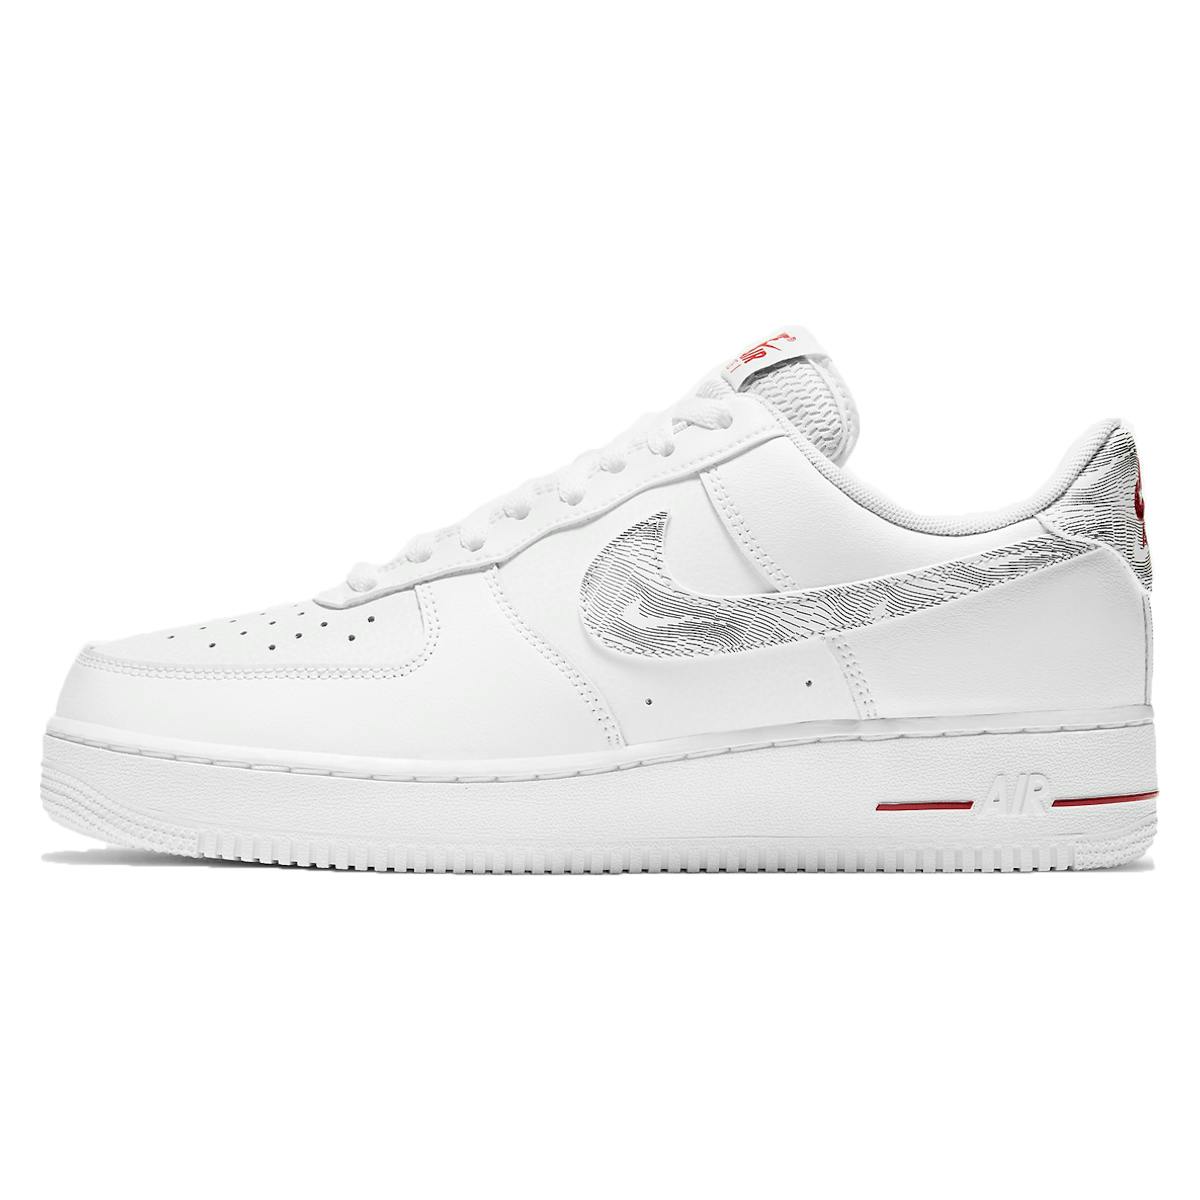 Nike Air Force 1 Low White University Red Topography Pack